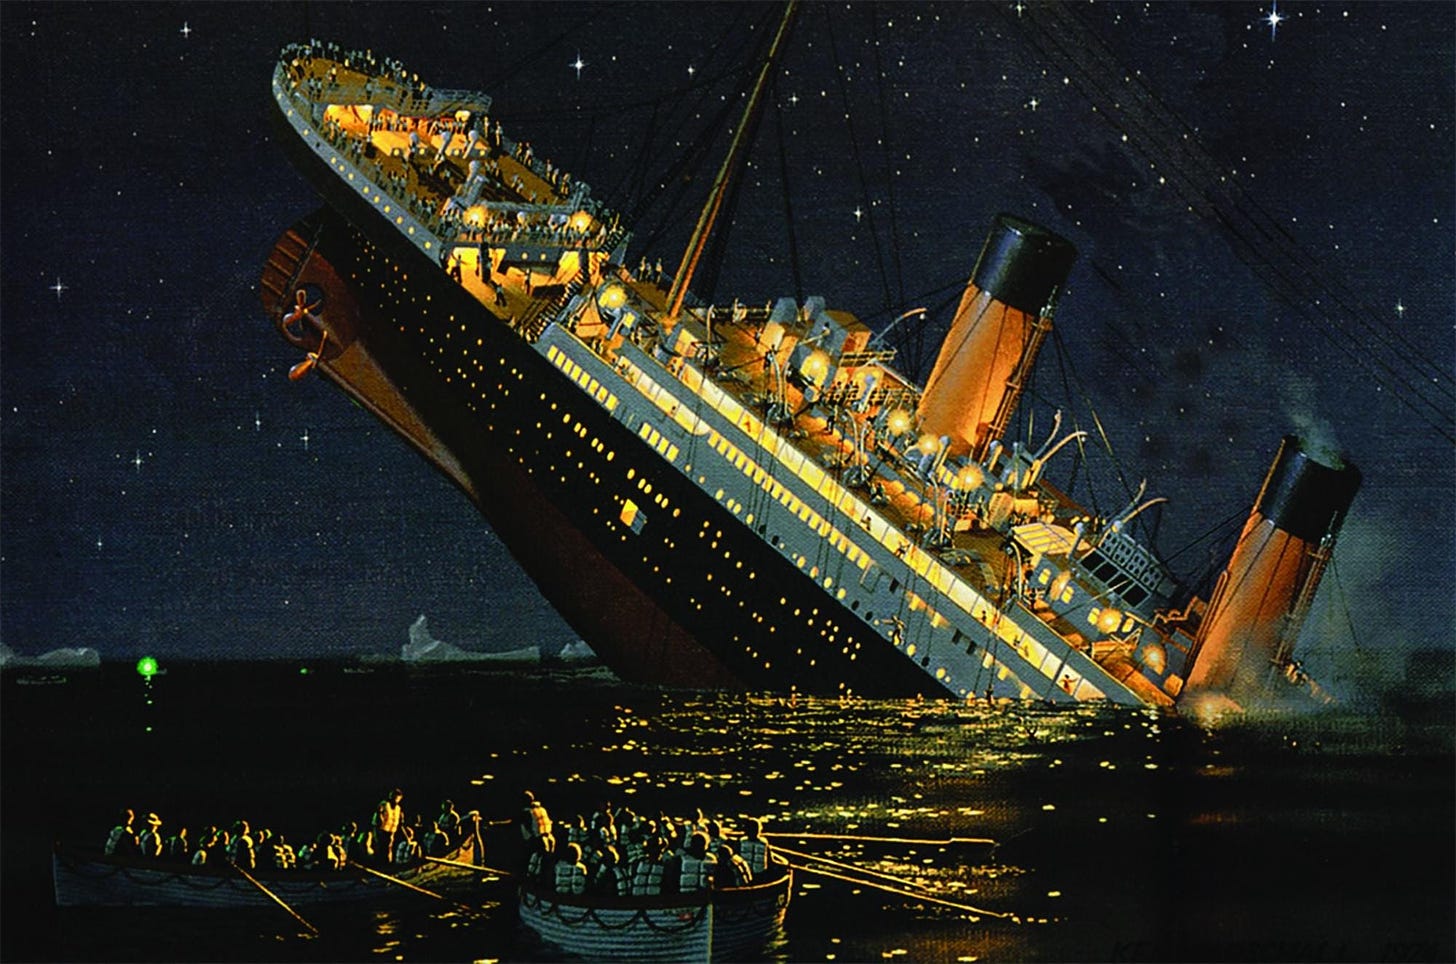 Who was at fault during the Titanic sinking? | by Arnav B | Medium